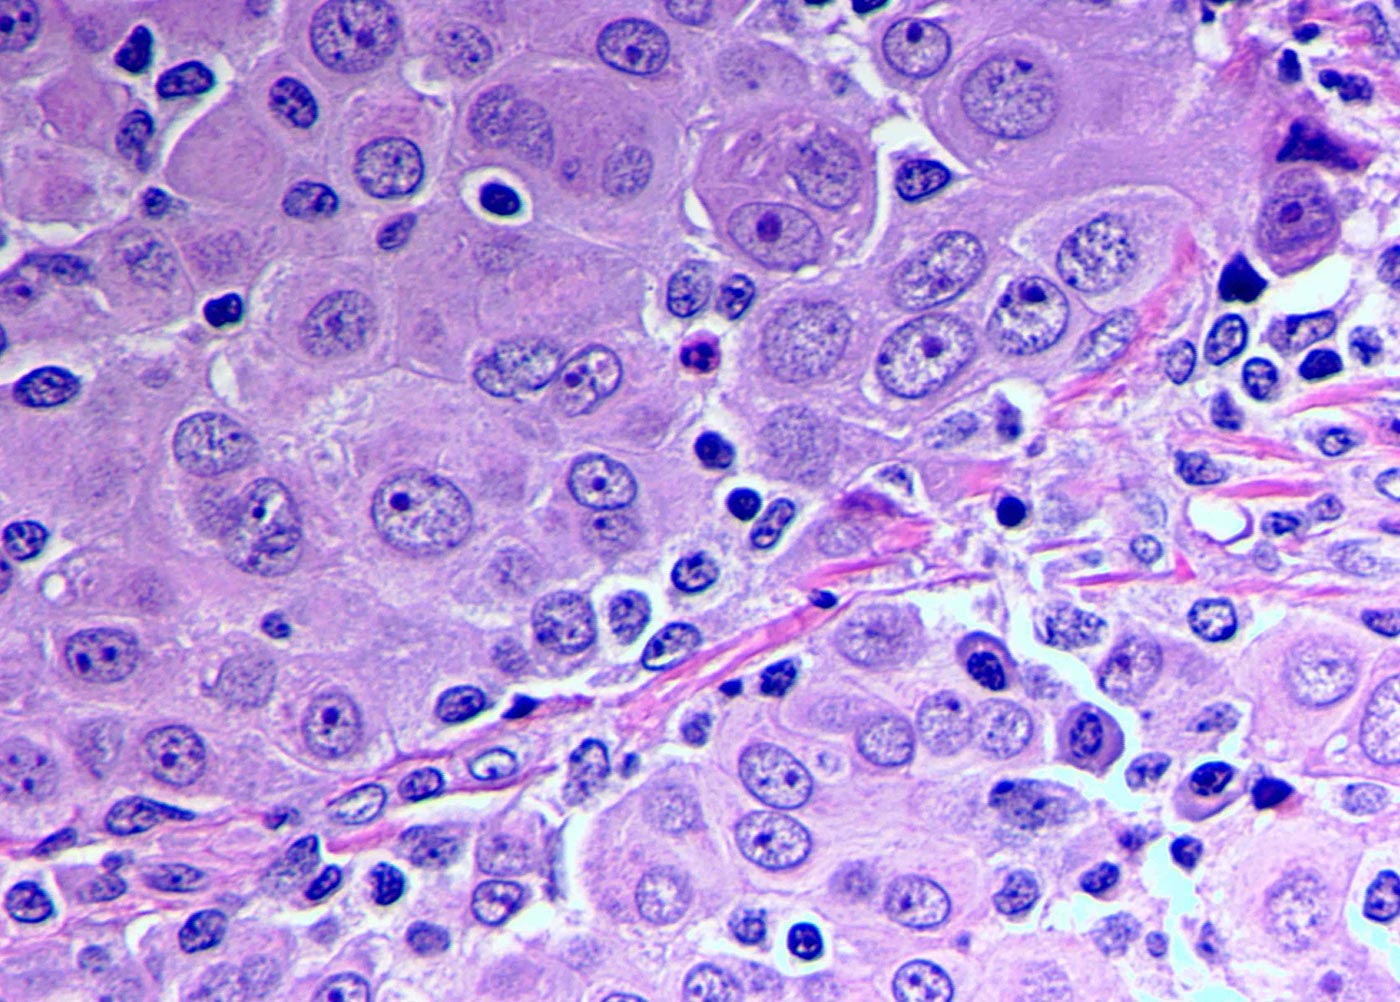 MESO epithelioid cells featured image 2